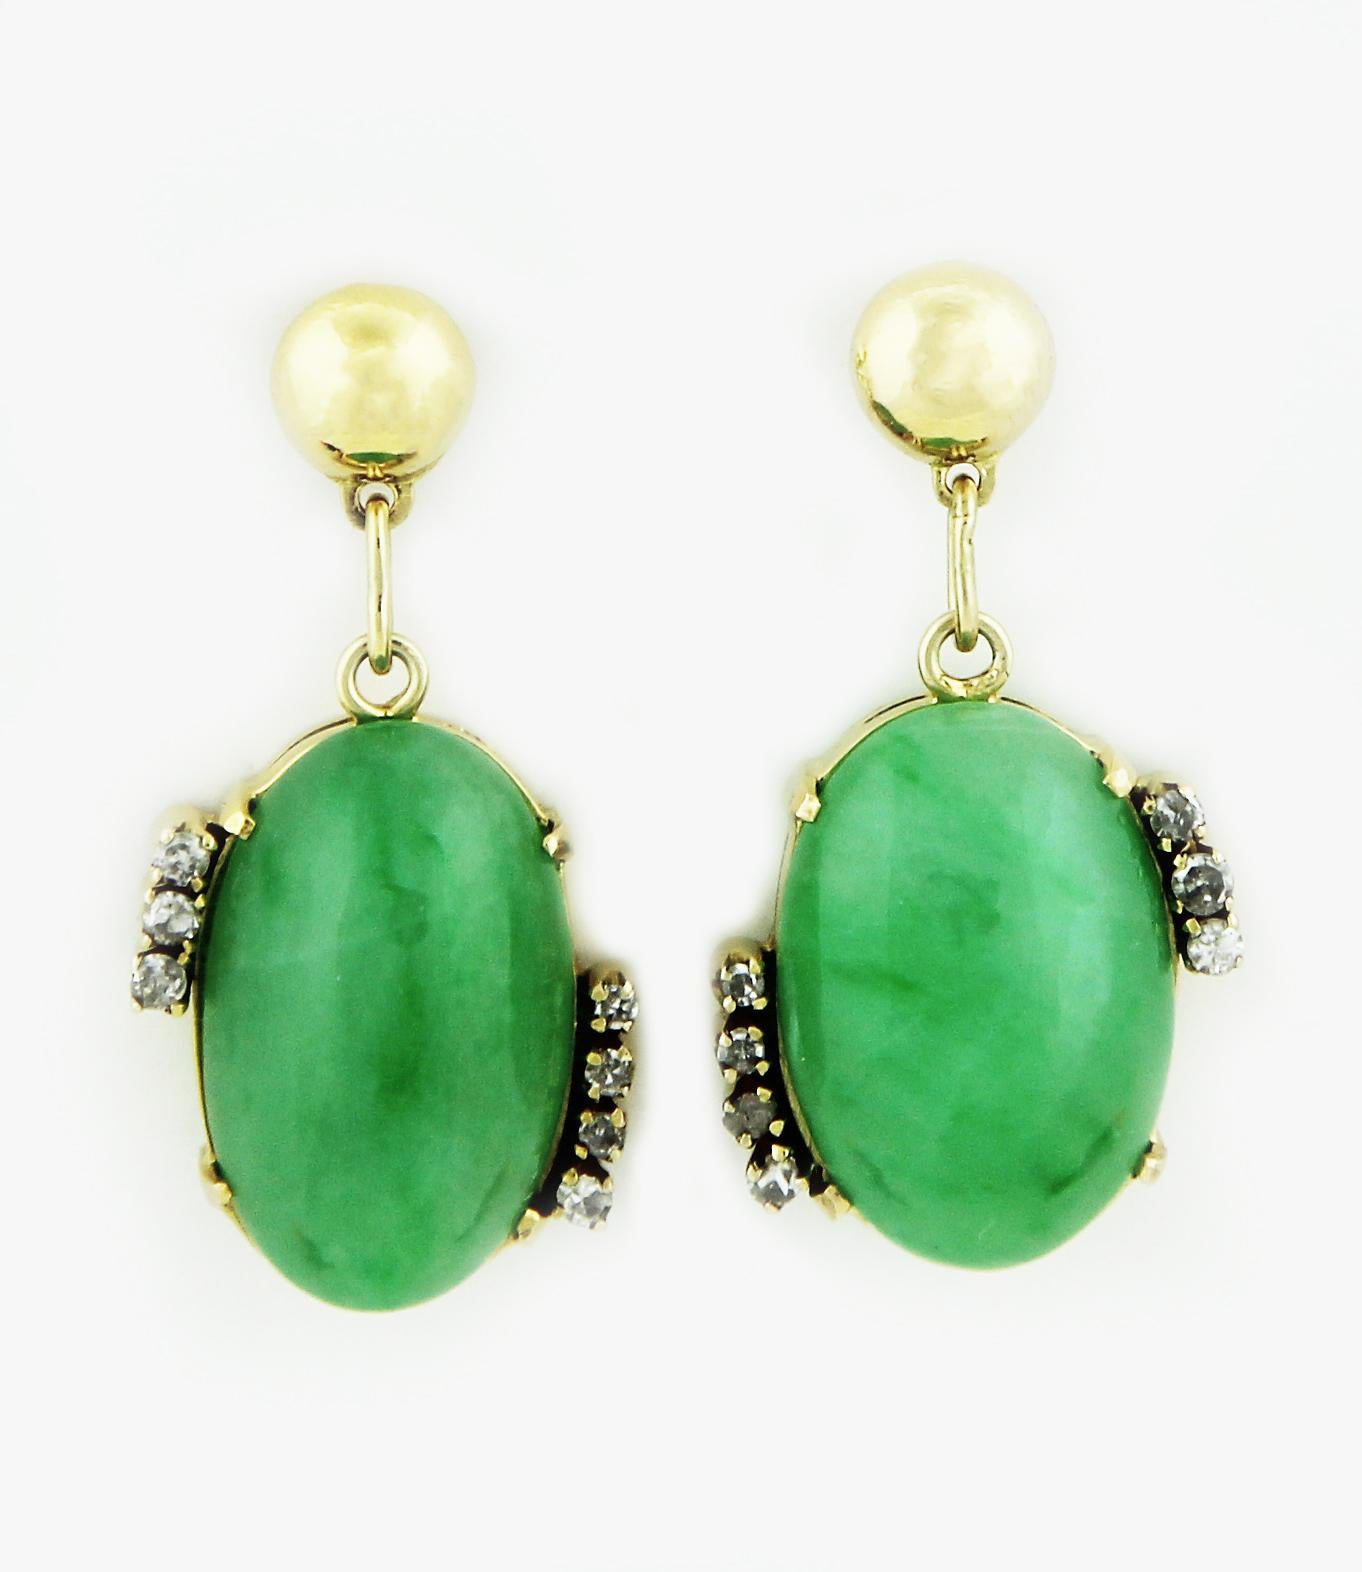 A pair of Earrings set with oval shaped cabochon Jade and diamonds in 18 ct yellow gold.
Jade accompanied with Gemmological Certification Services Certificate for Natural untreated Jadeite Jade.
1 Jade Measurements: 18.5 x 11.6 x 7.0 mm
1 Jade